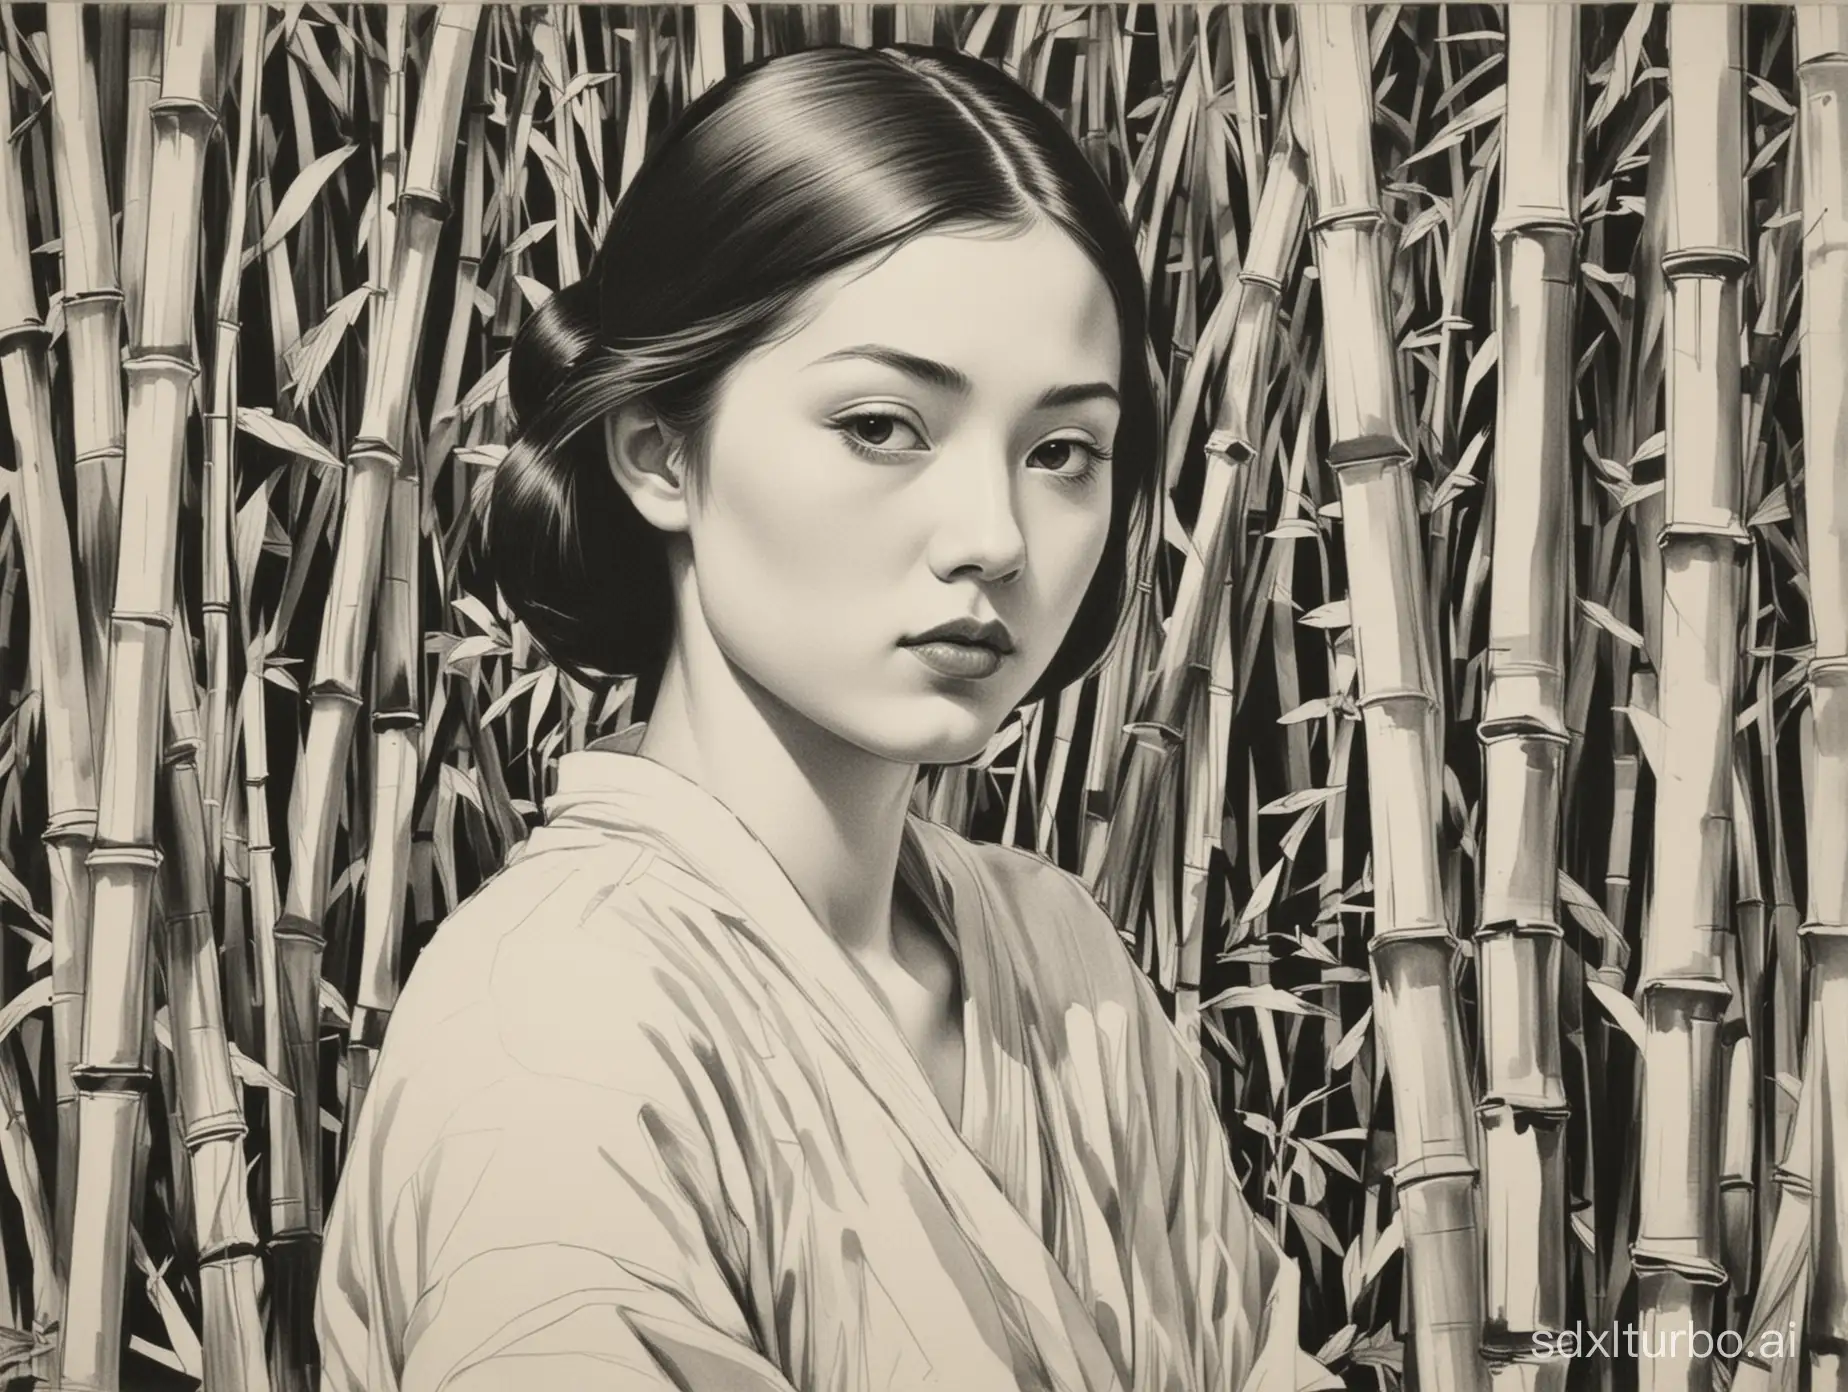 a simple drawing of a girl in bamboo forests simple black and white woodcut, japanese, painted by ernest procter, david hockney, tamara de lempicka, sonia delaunay, artemisia gentileschi